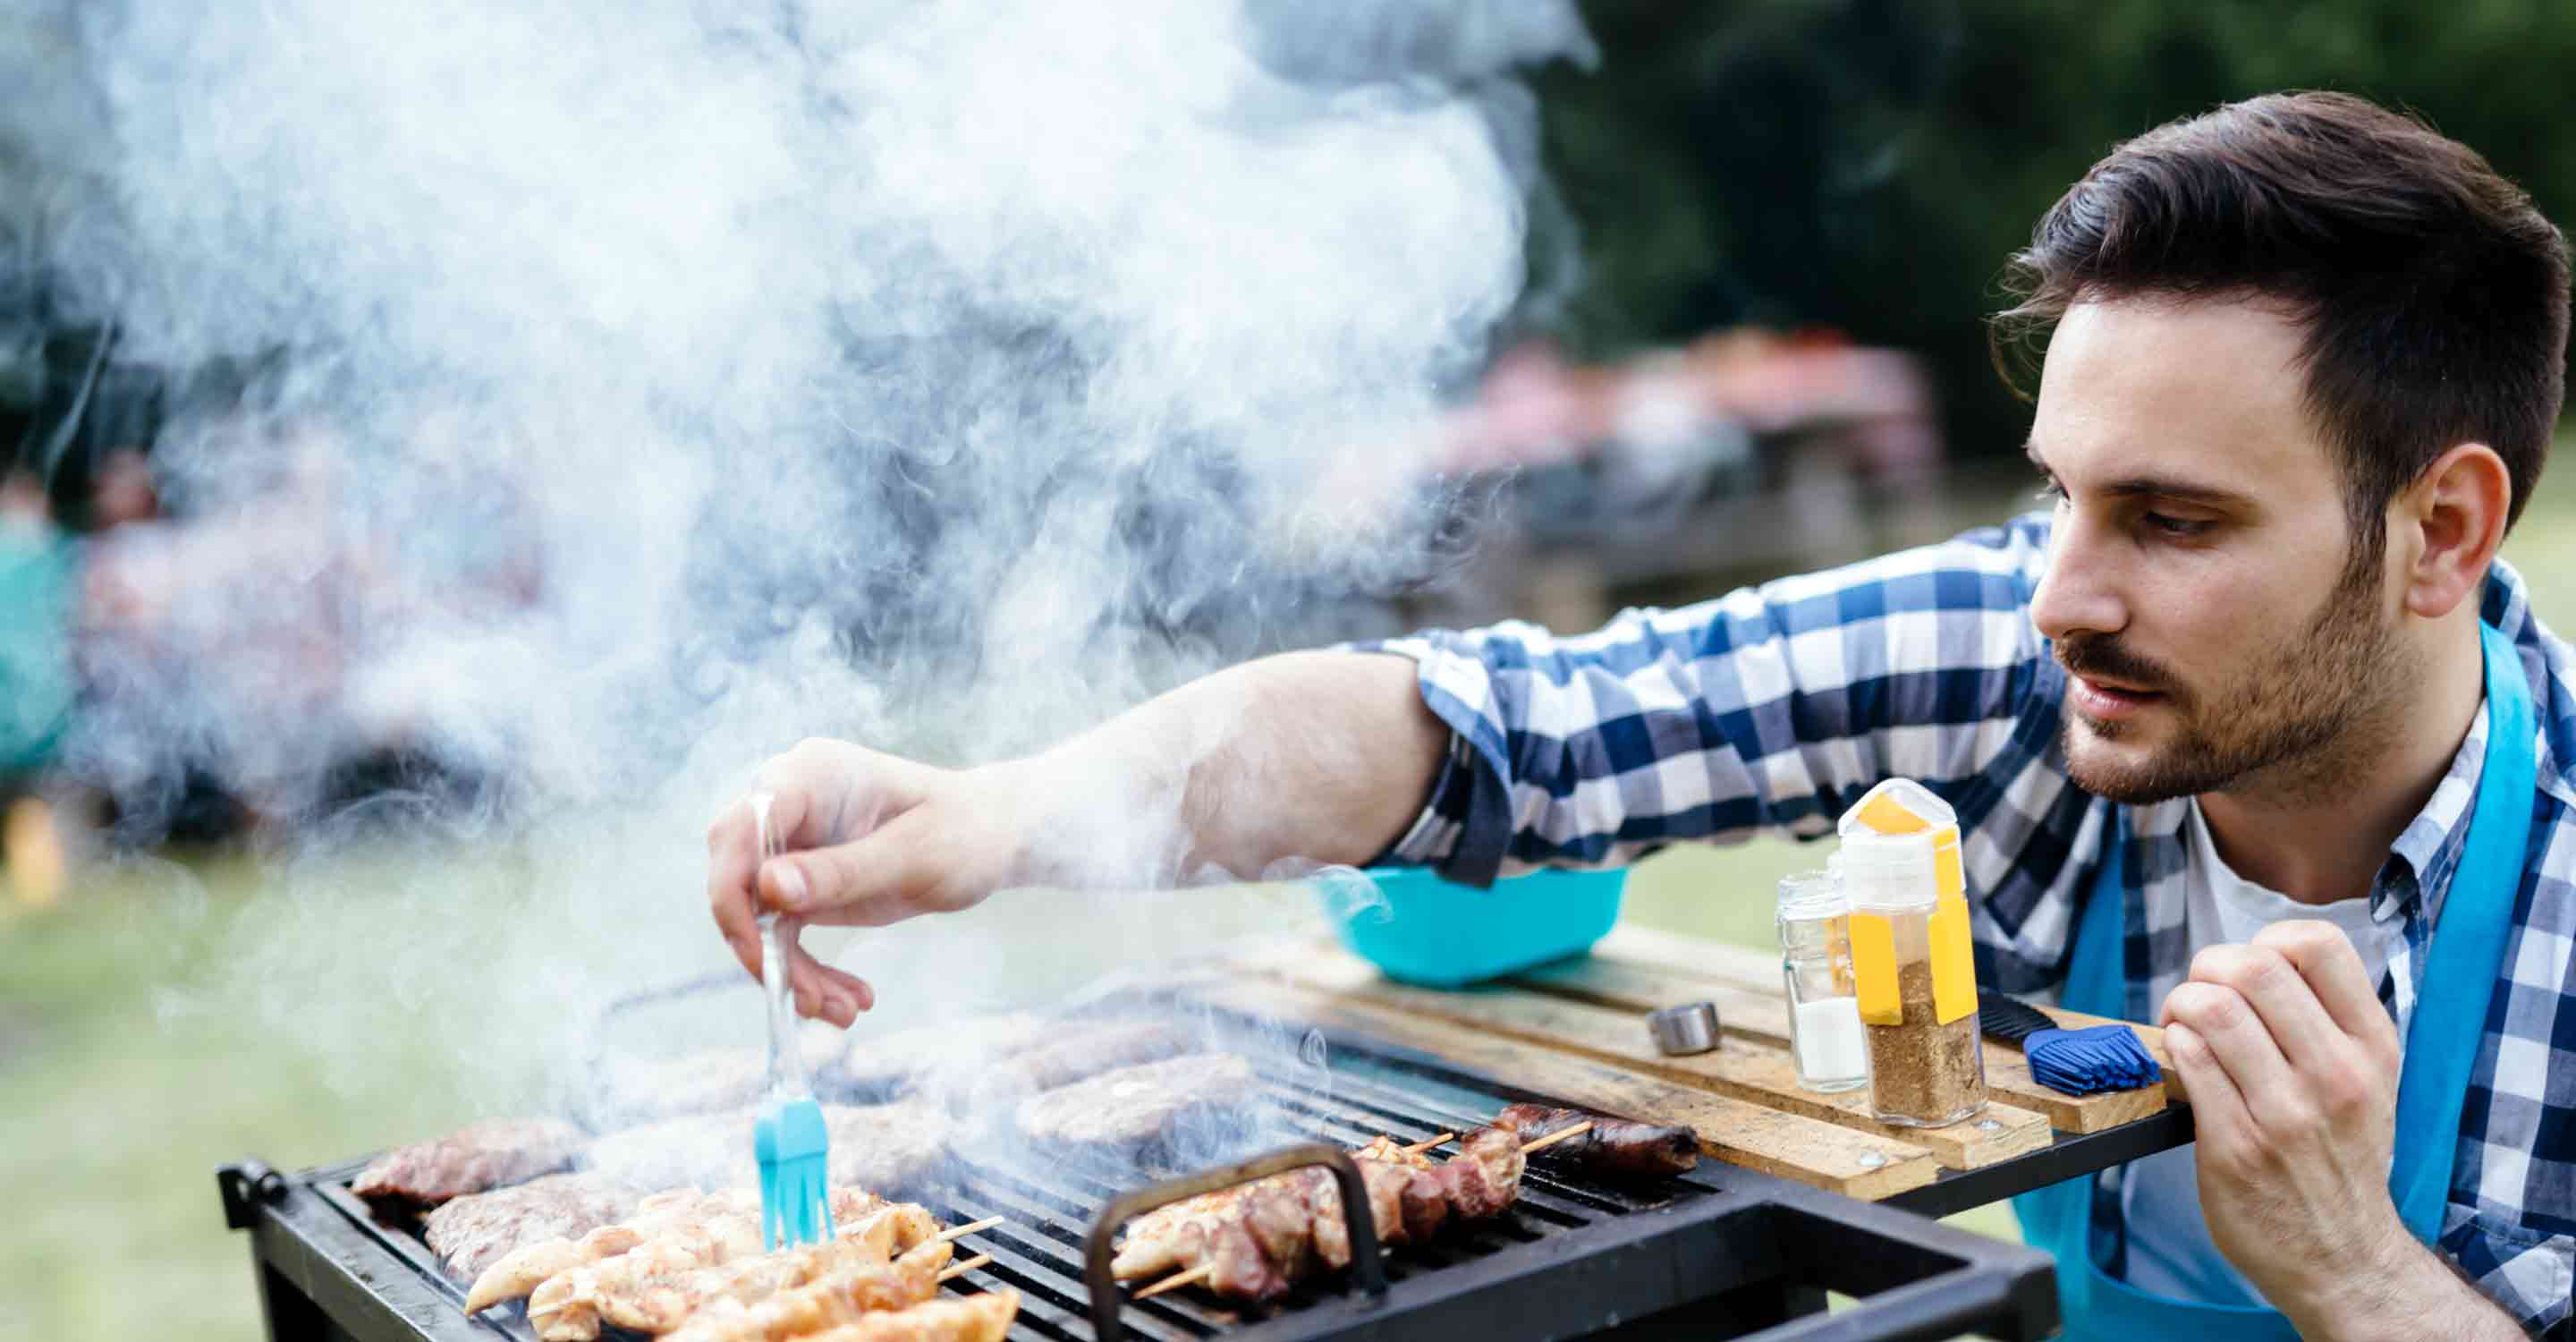 Five ways to make your summer barbecue better for the environment